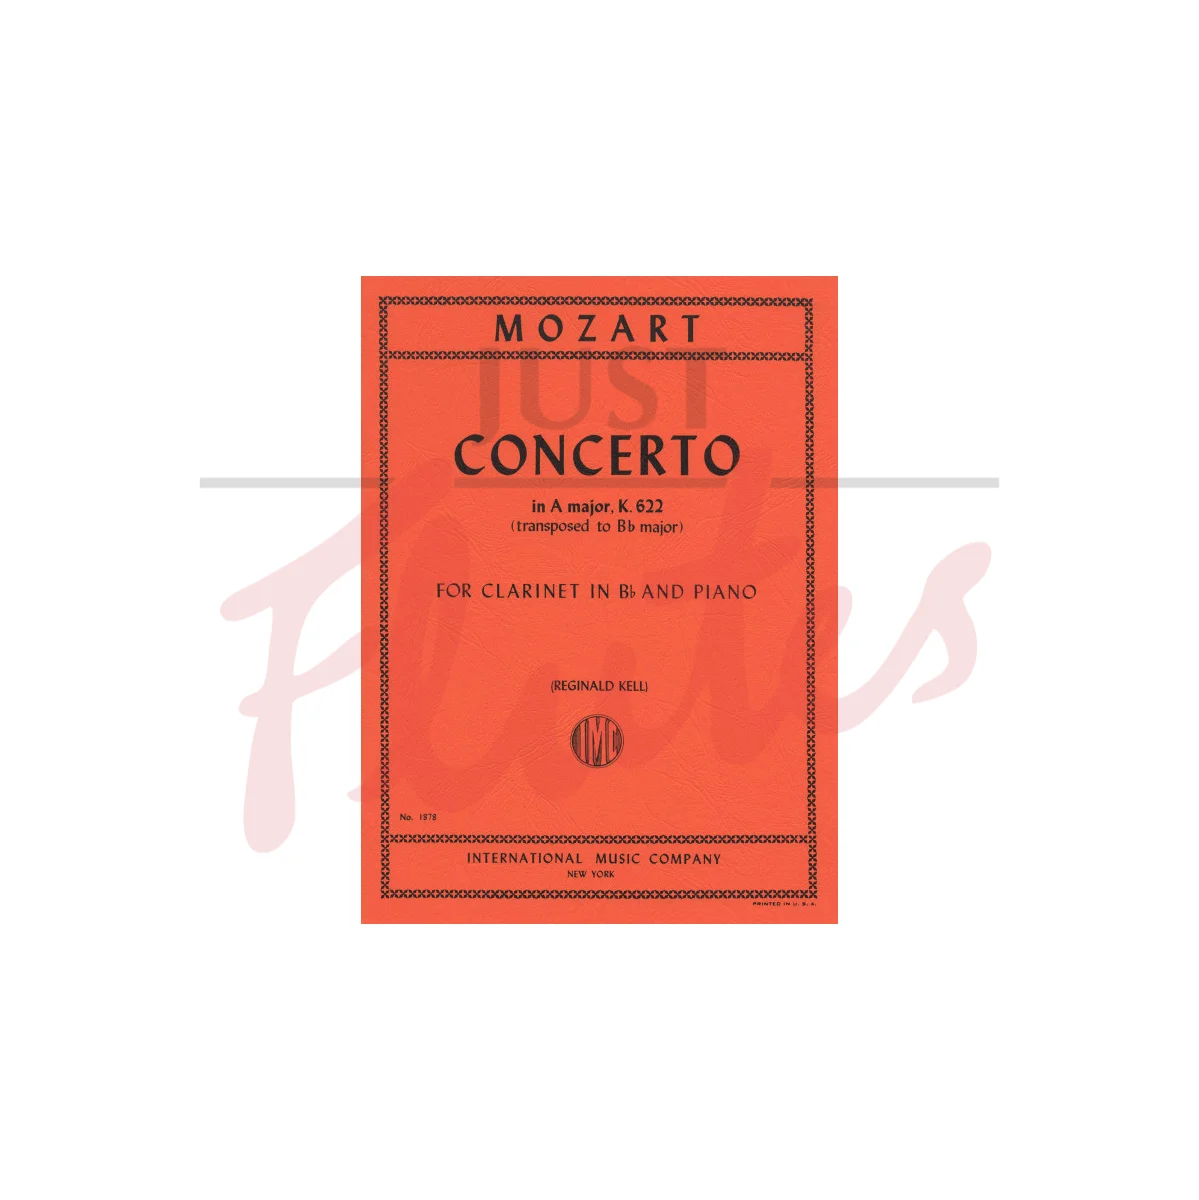 Concerto in A major for Clarinet and Piano